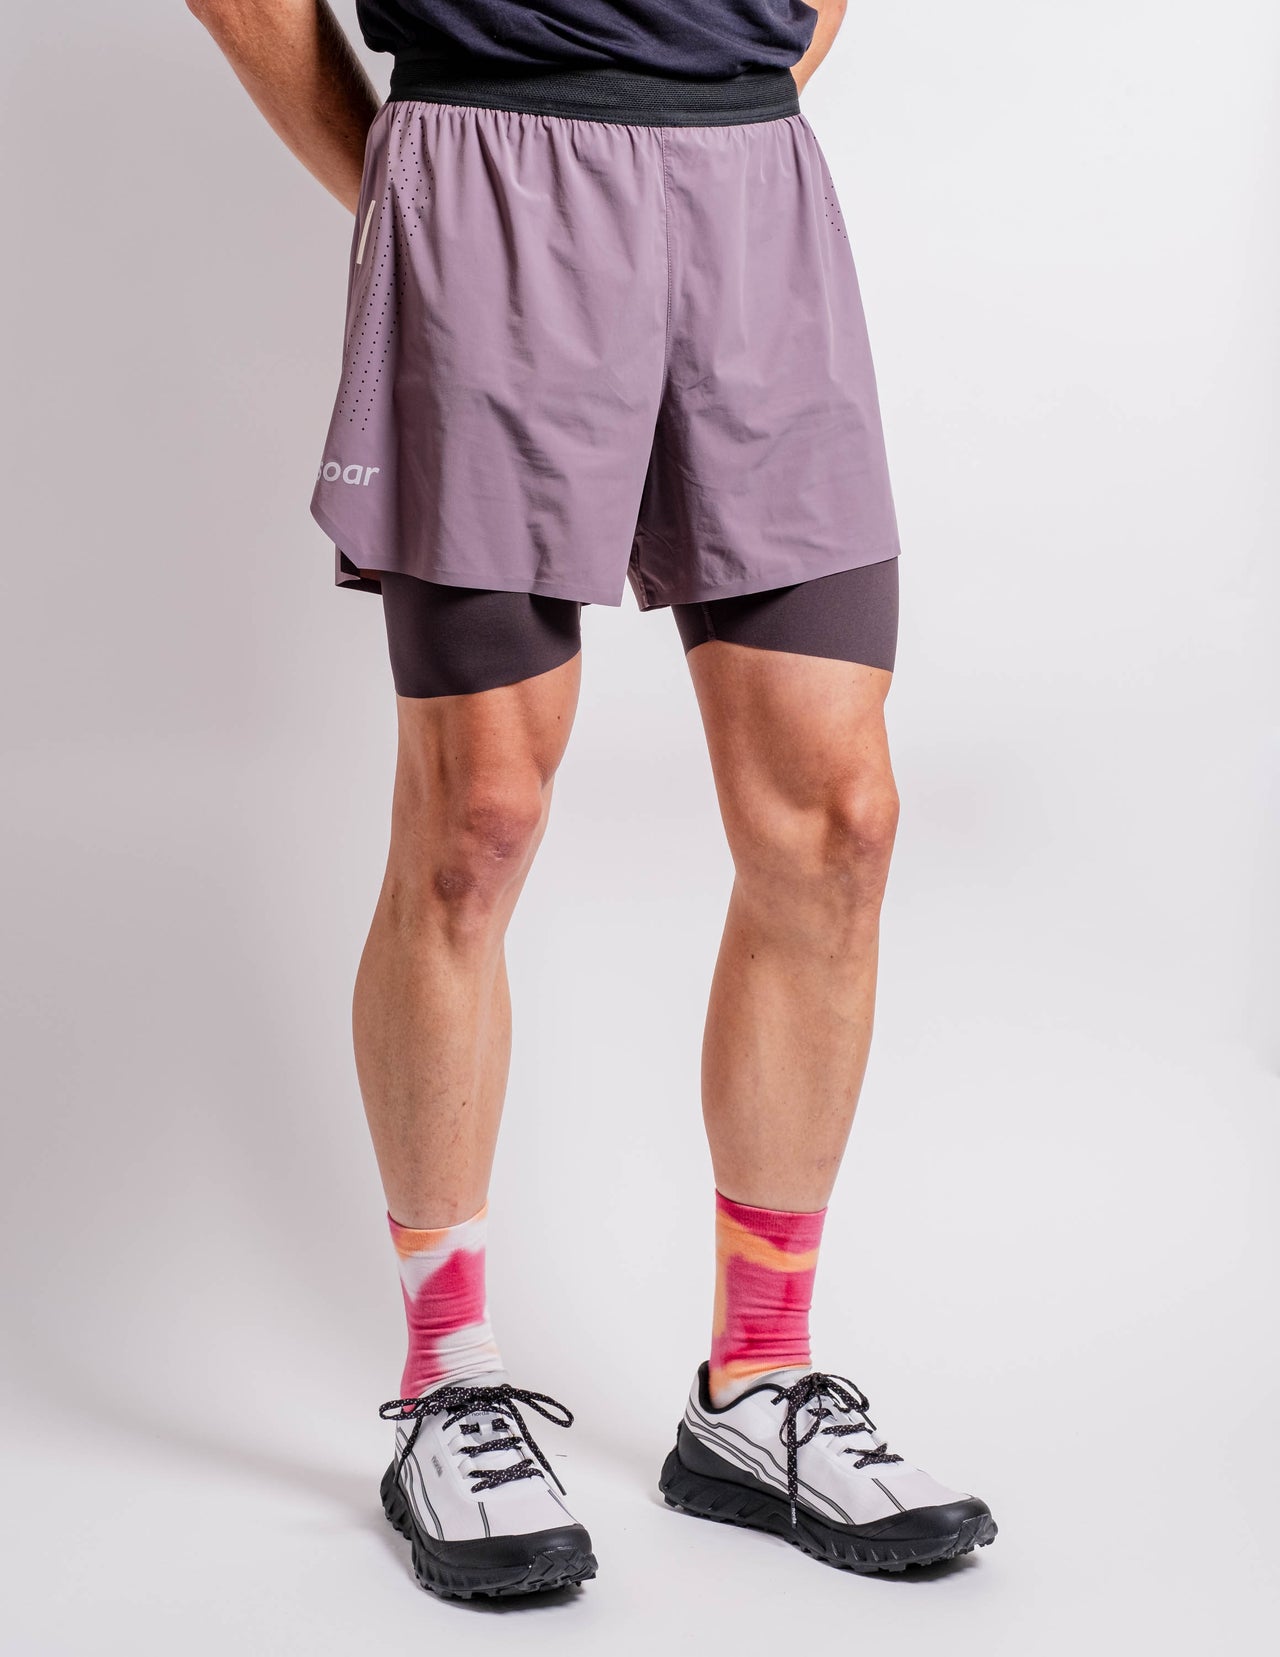 Dual Run Shorts in Moonscape